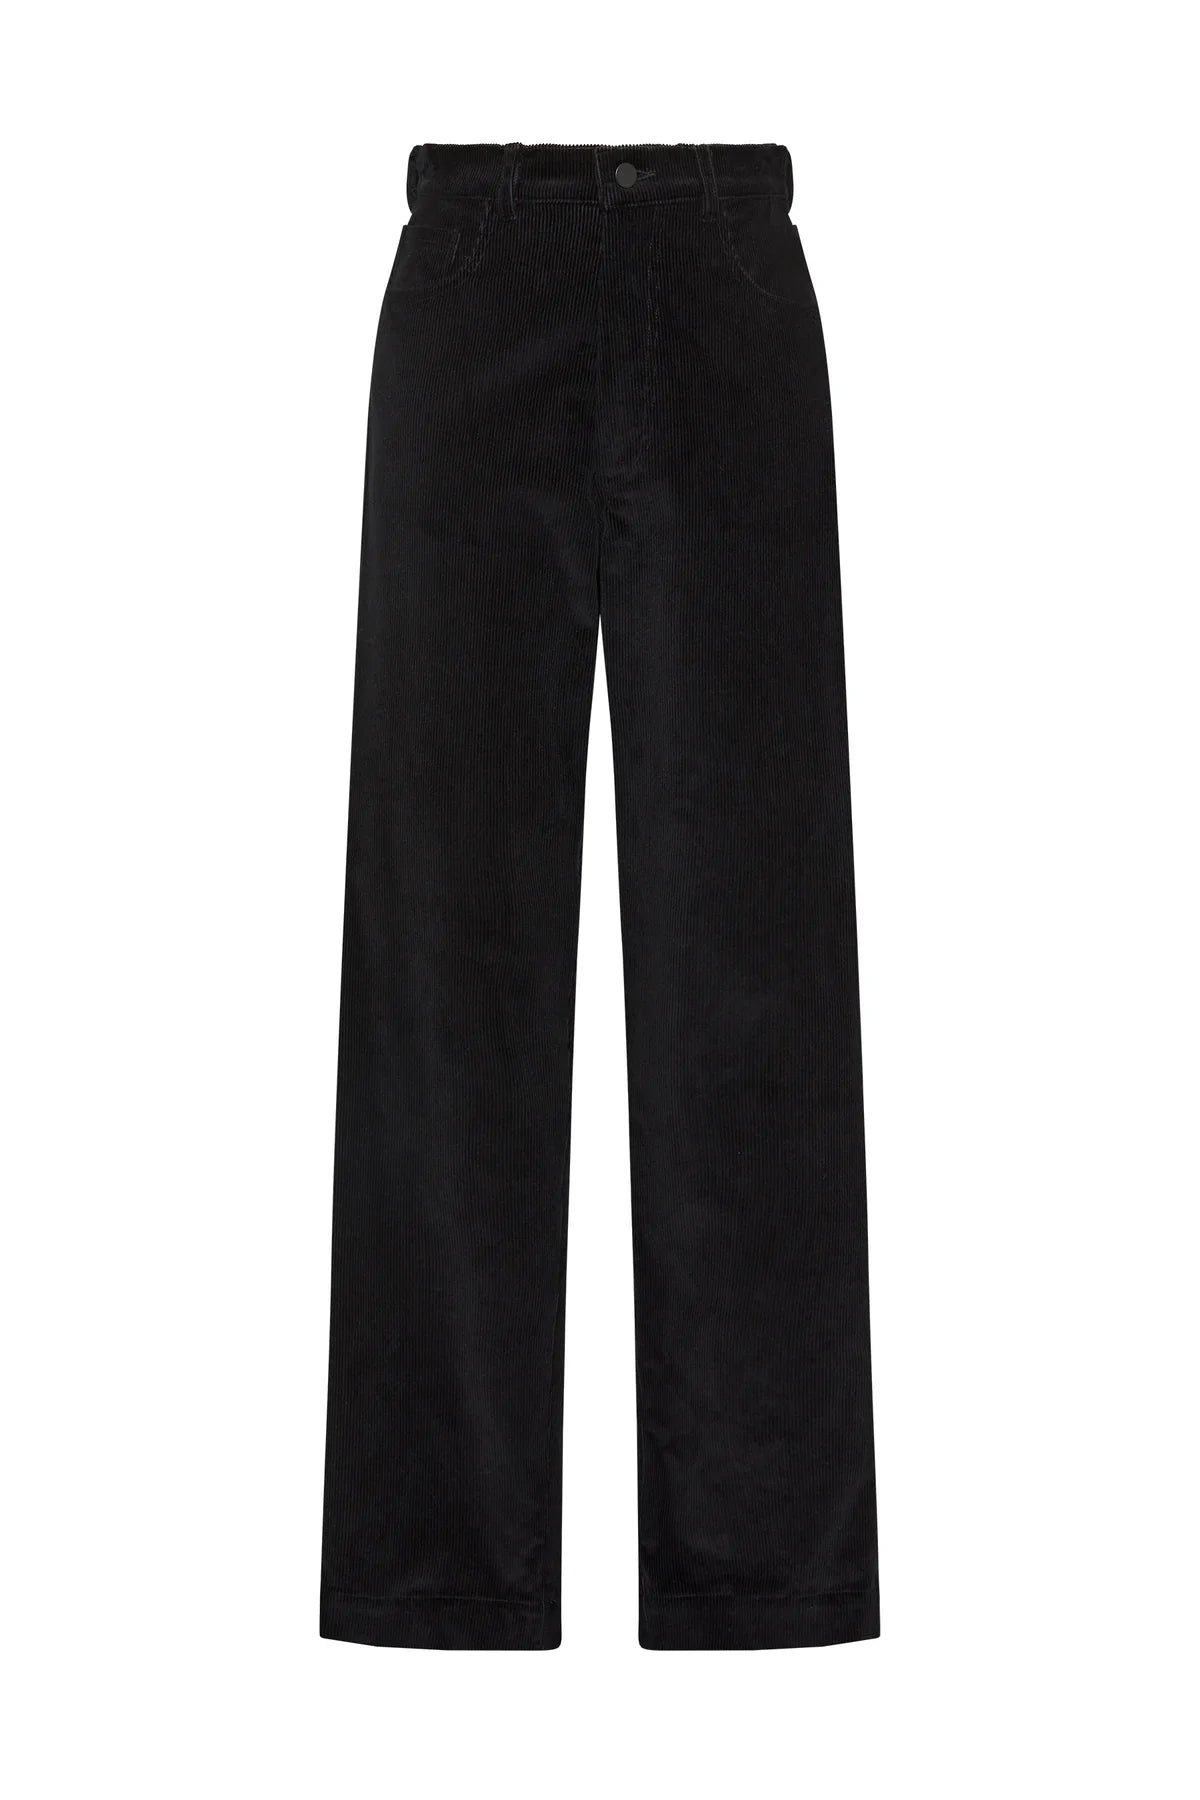 Cord Straight Leg Pant in Black by Bassike